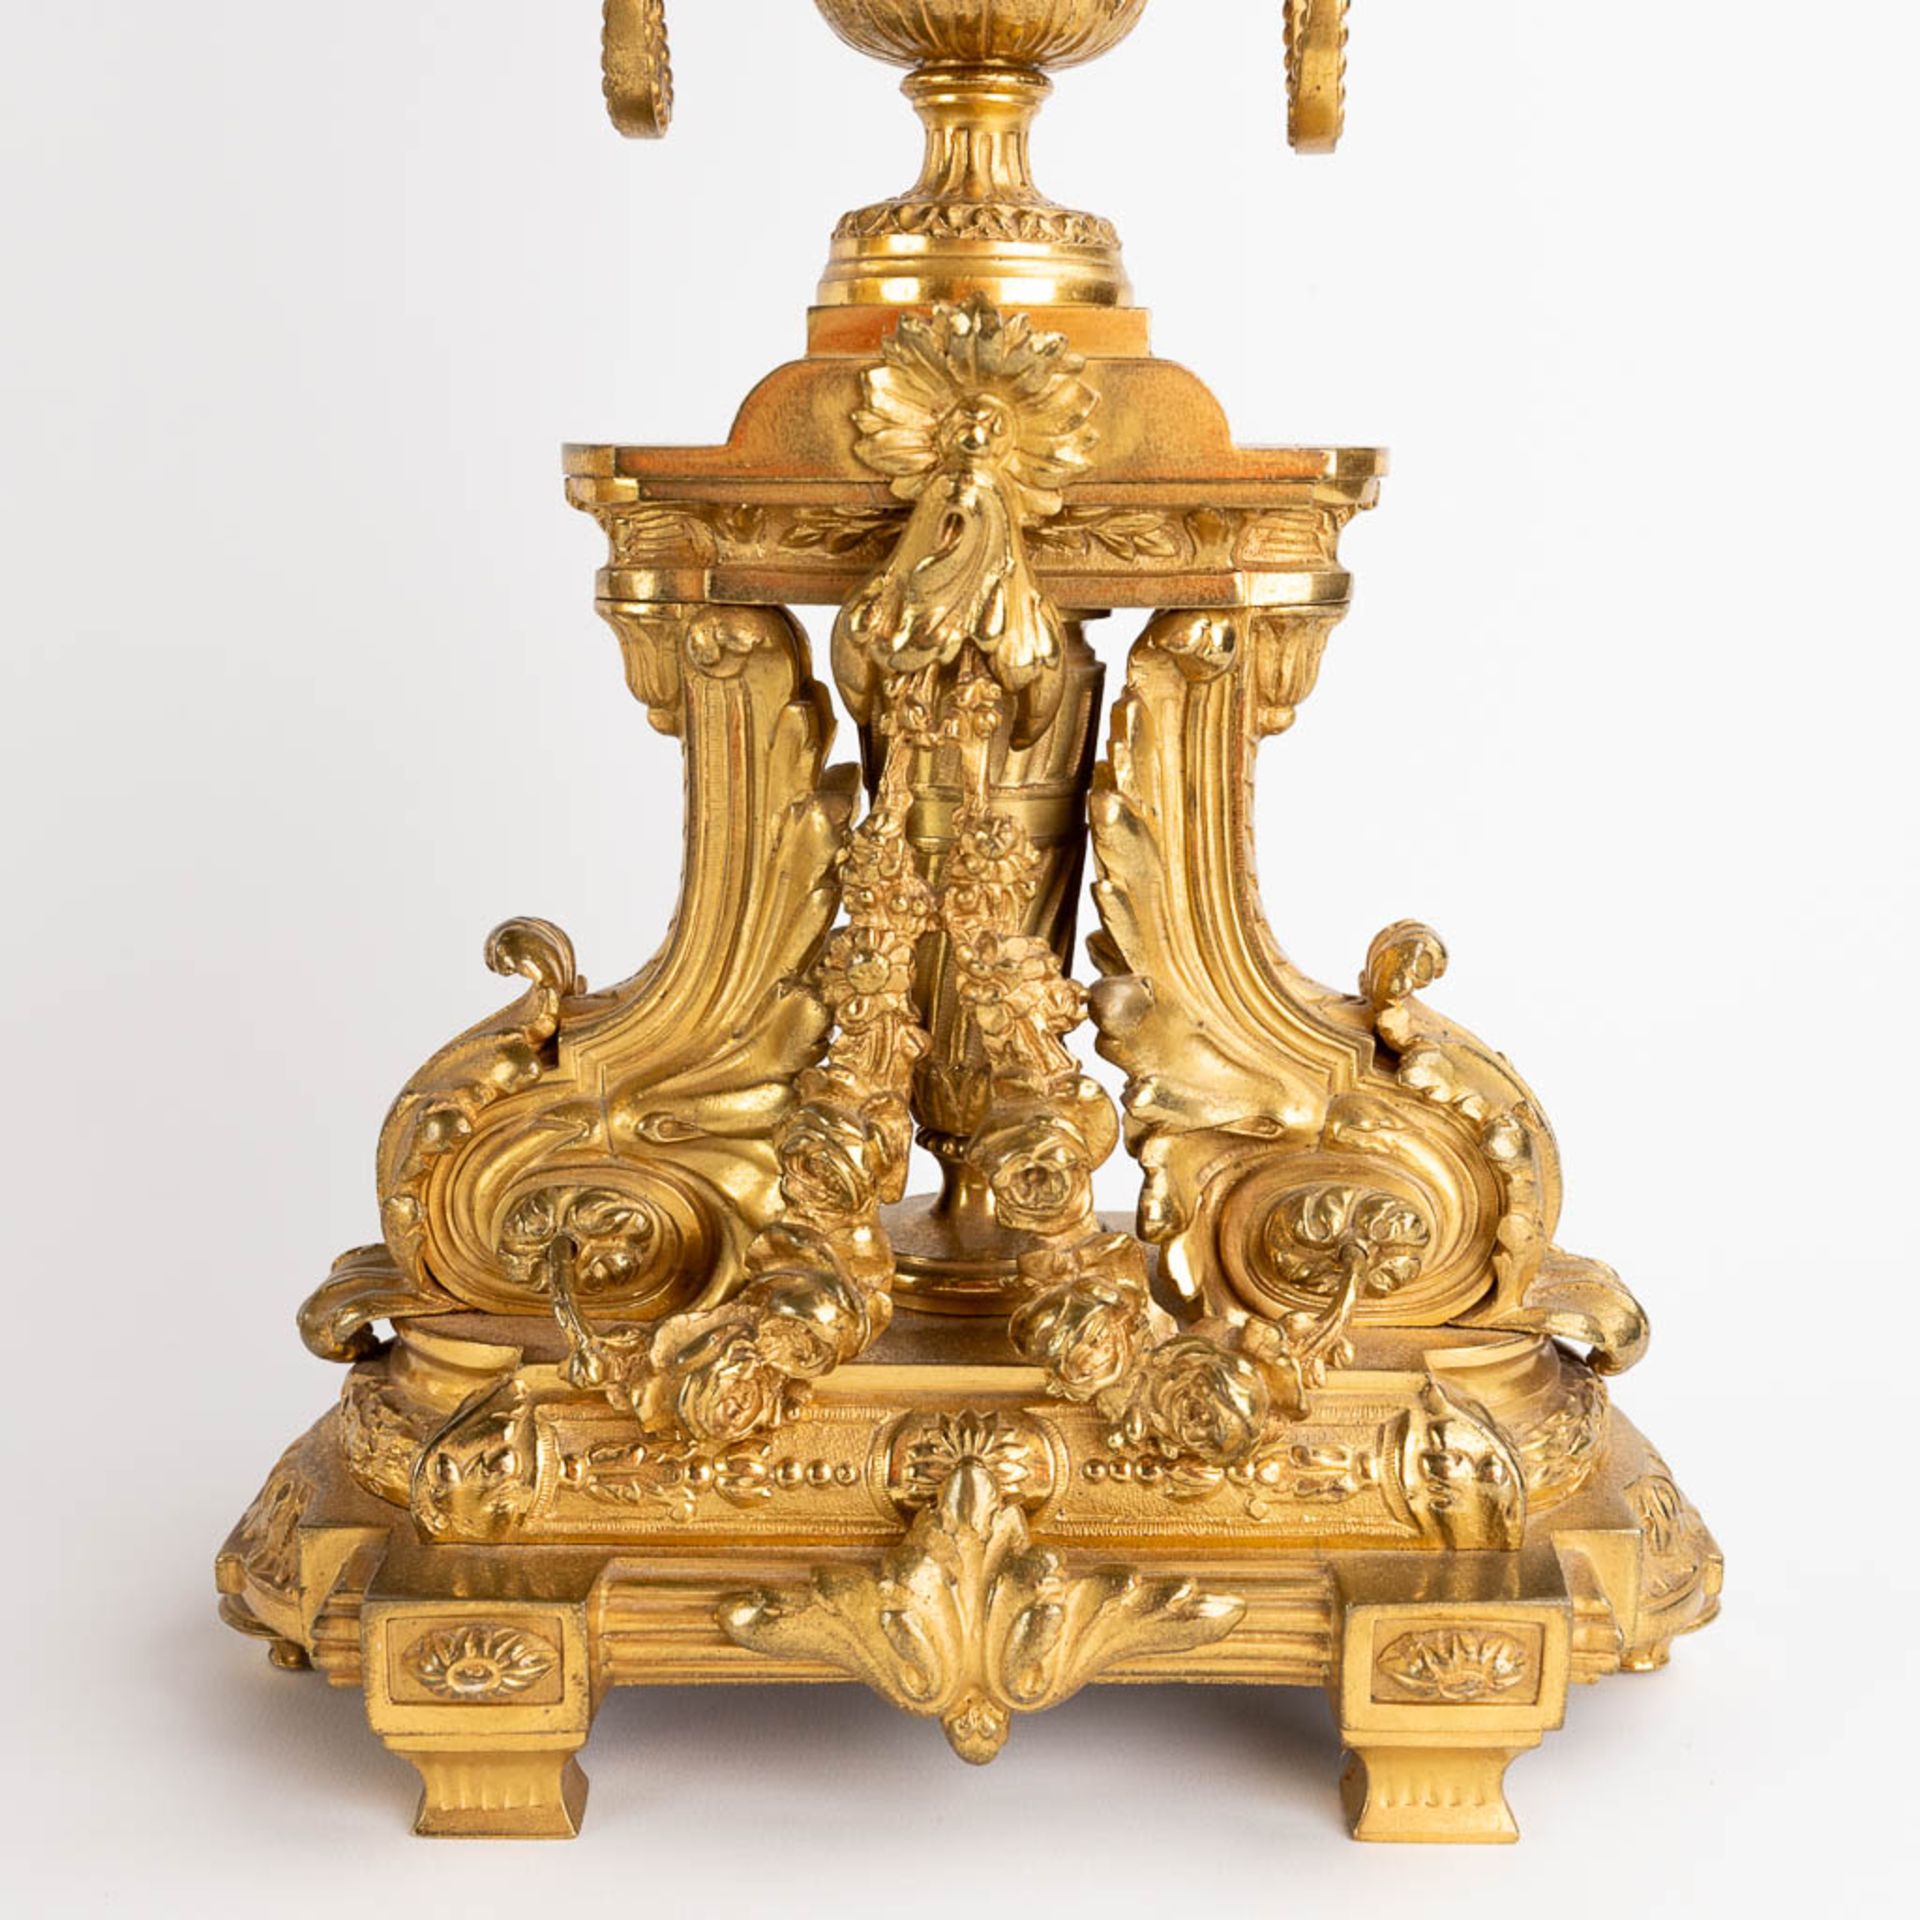 A three-piece mantle garniture clock and candelabra, gilt bronze in a Louis XVI style, 19th C. (D:19 - Image 11 of 19